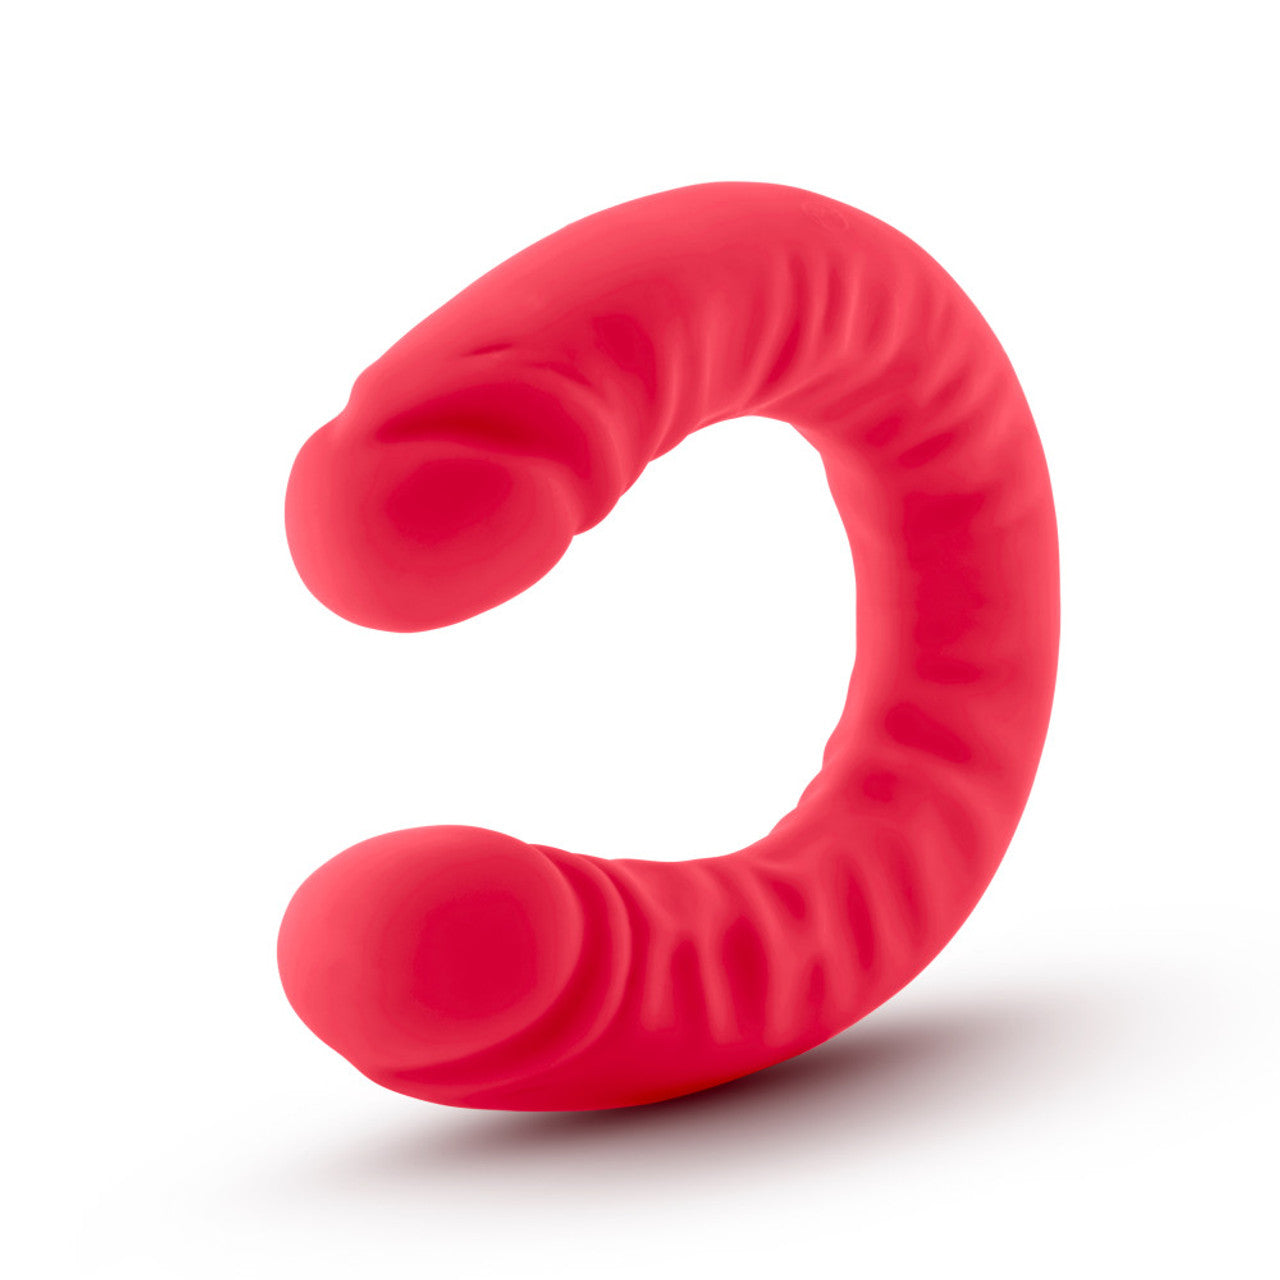 RUSE 18" Silicone Double Dong - Cerise